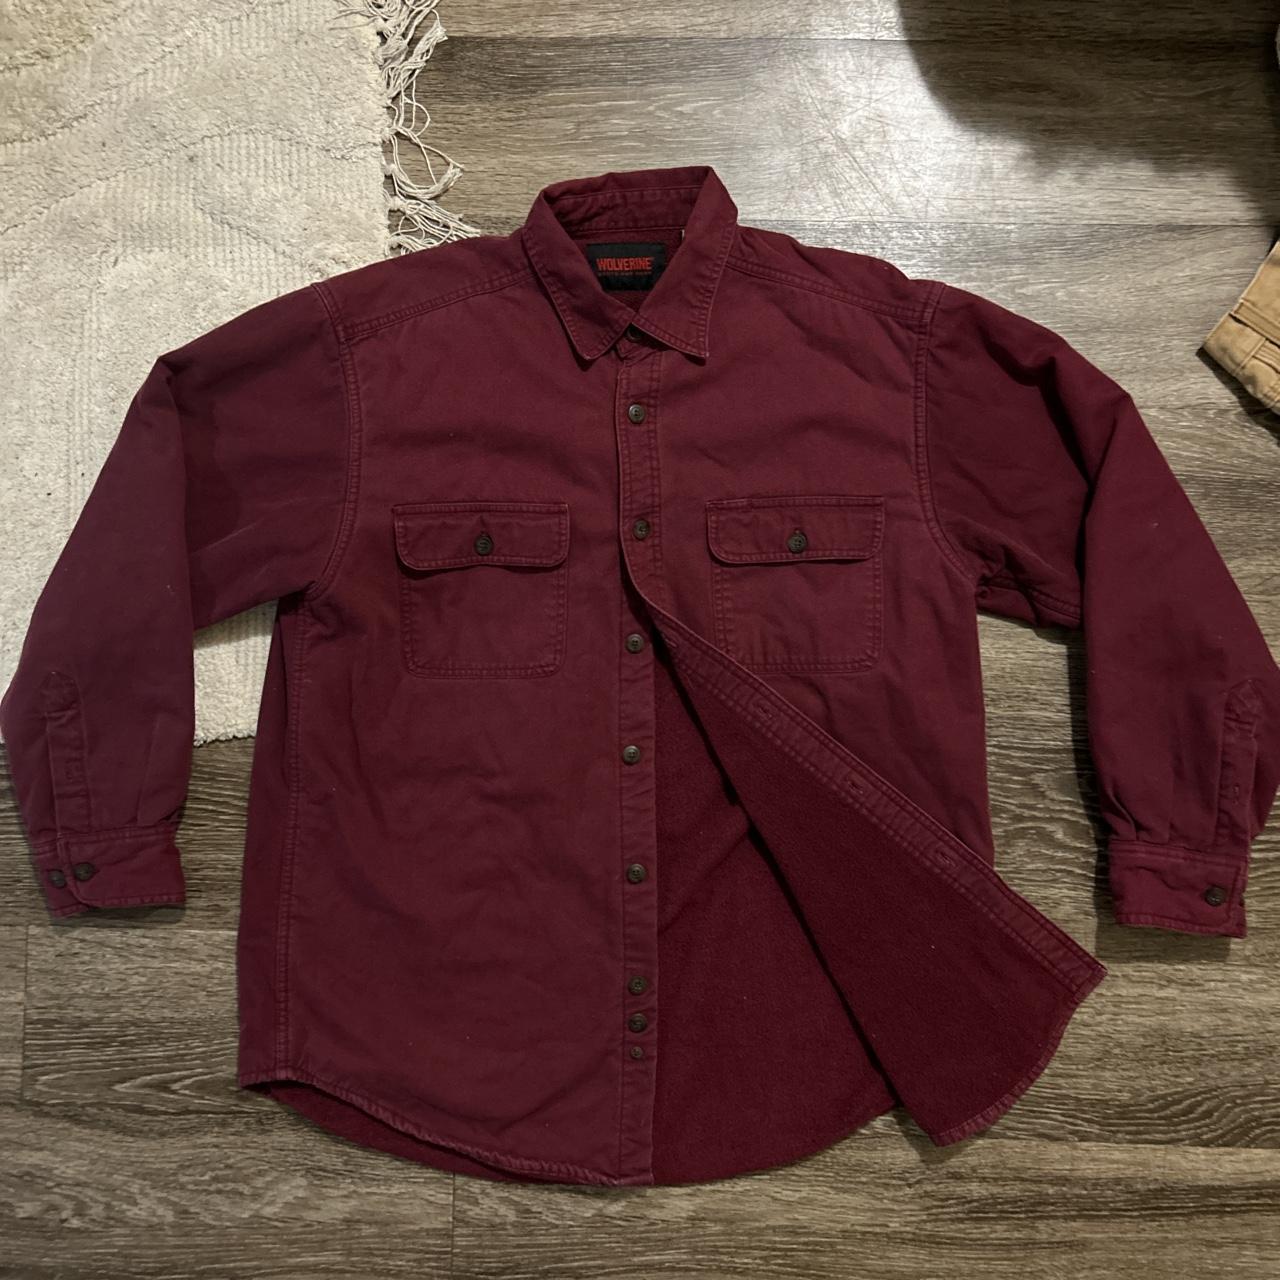 VINTAGE WOLVERINE BOOTS AND GEAR BURGANDY BUTTON UP... - Depop